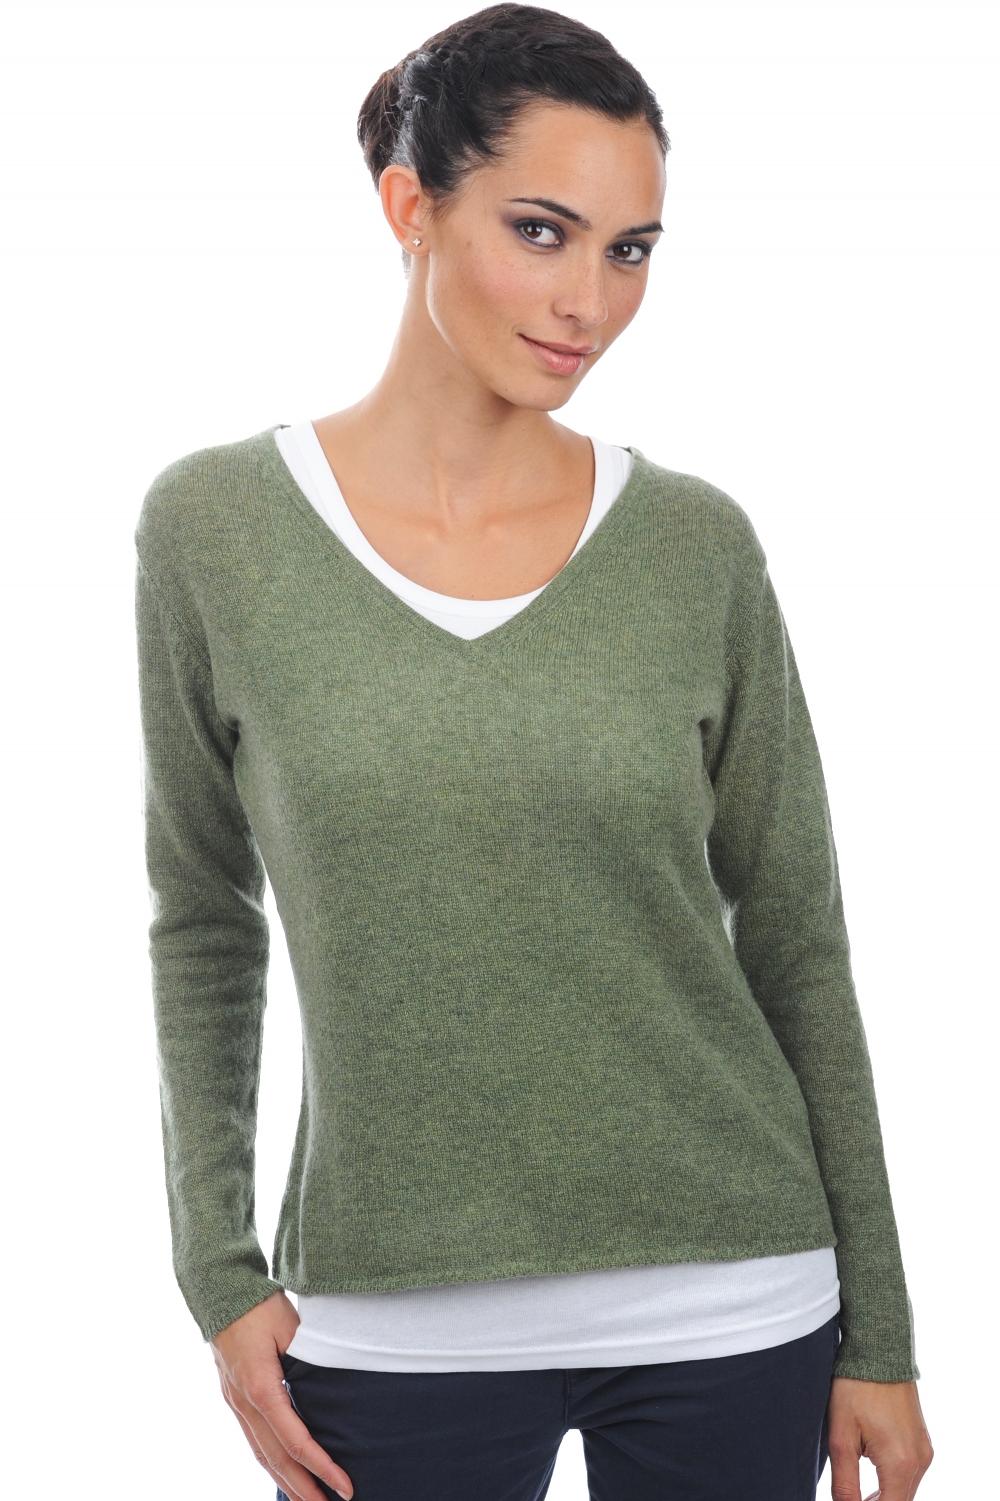 Cashmere ladies basic sweaters at low prices flavie olive chine 2xl